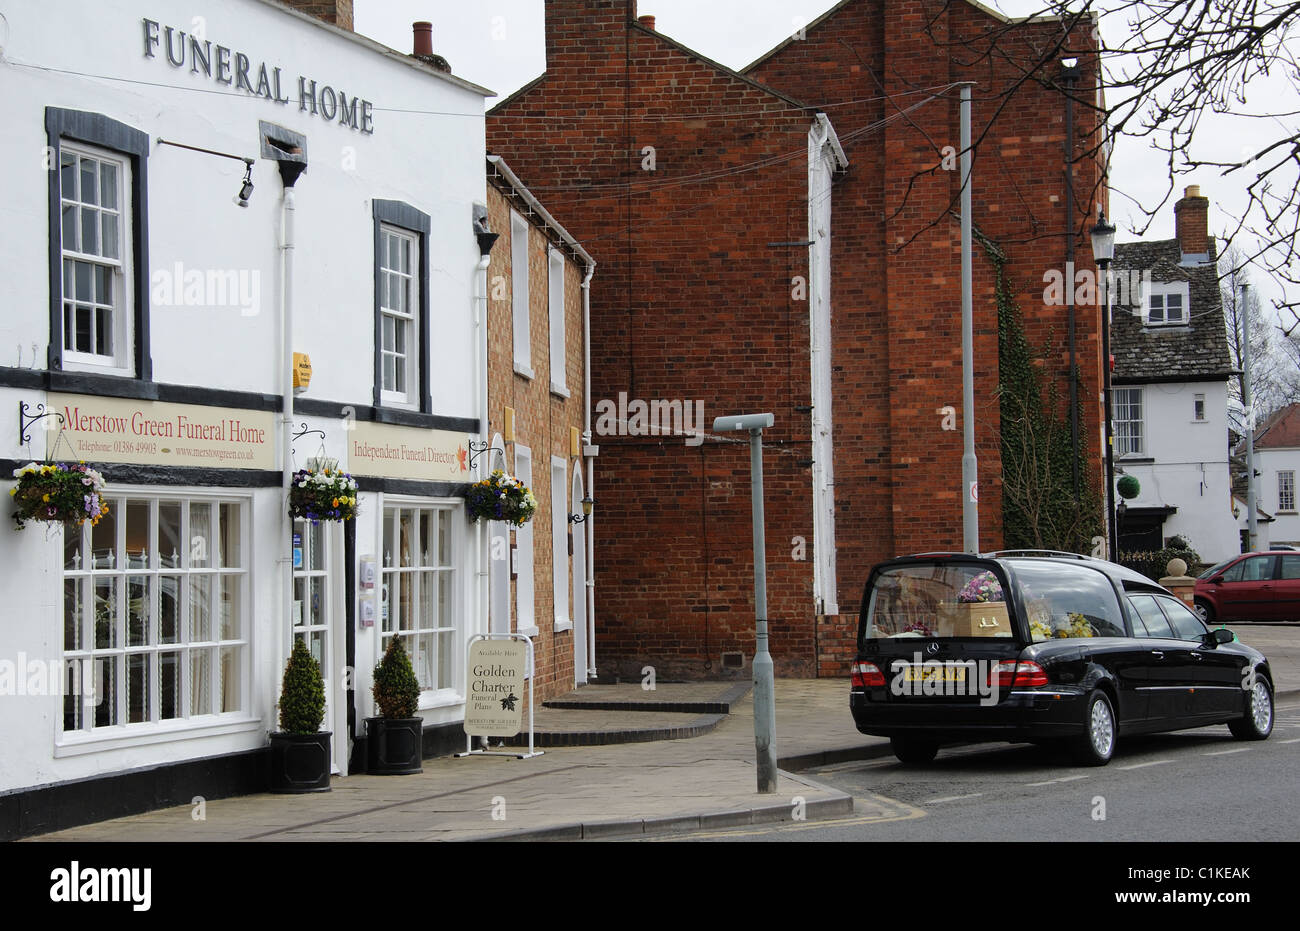 Hearse and coffin outside a funeral home in Worcestershire England Stock Photo